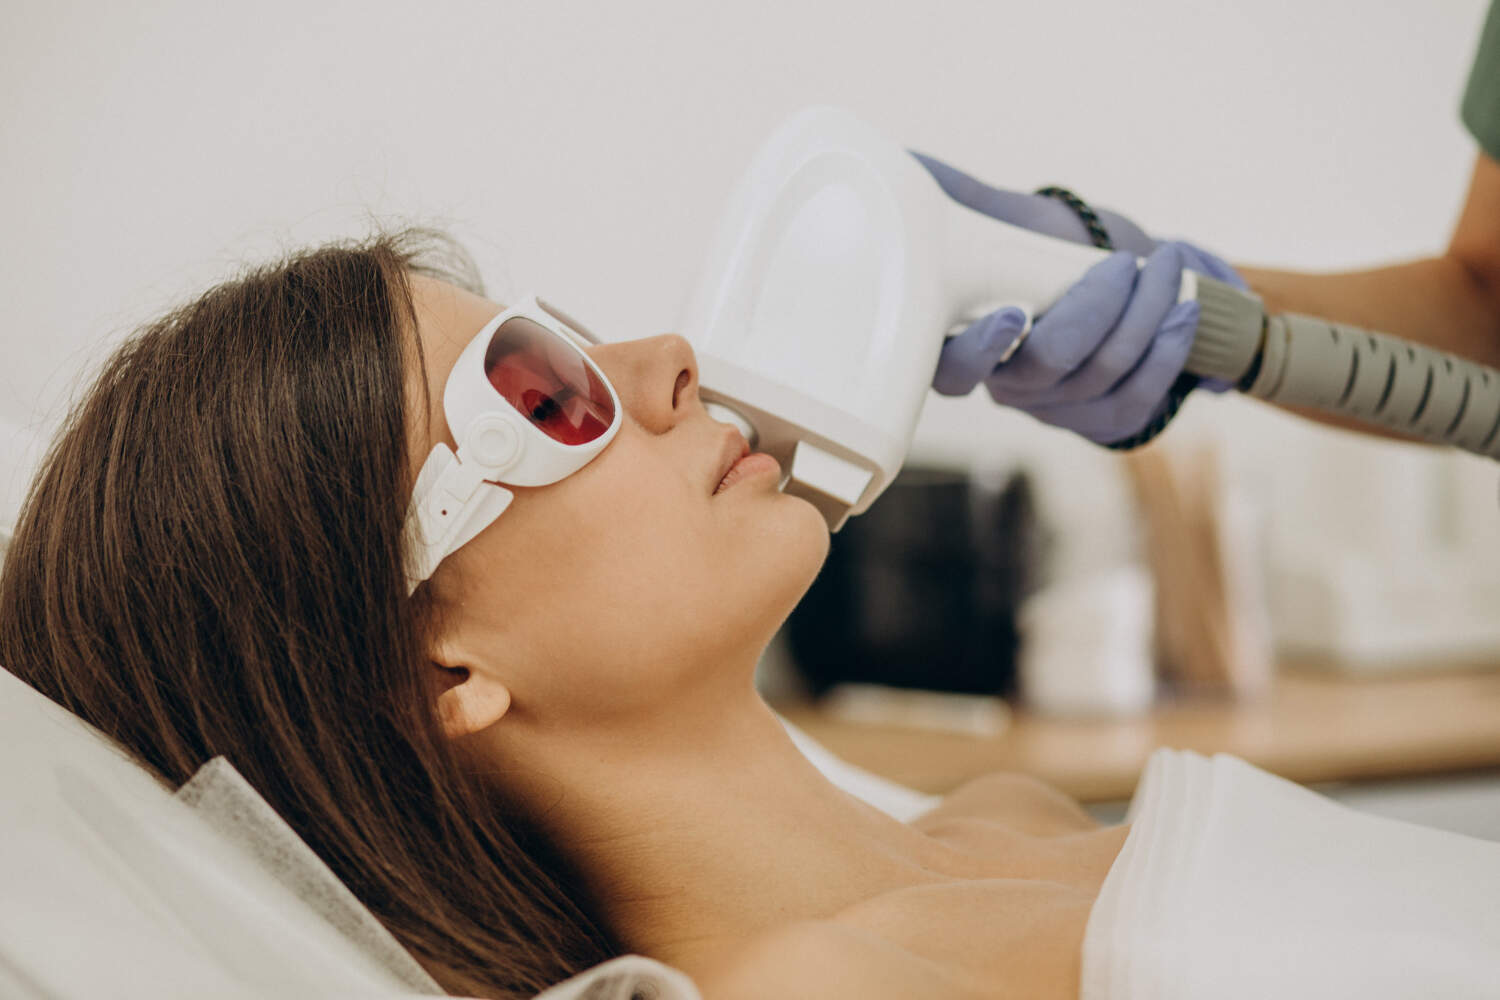 Sensitive Skin Solutions: How Laser Hair Removal Treatment Can Help to Reduce Unwanted Hair